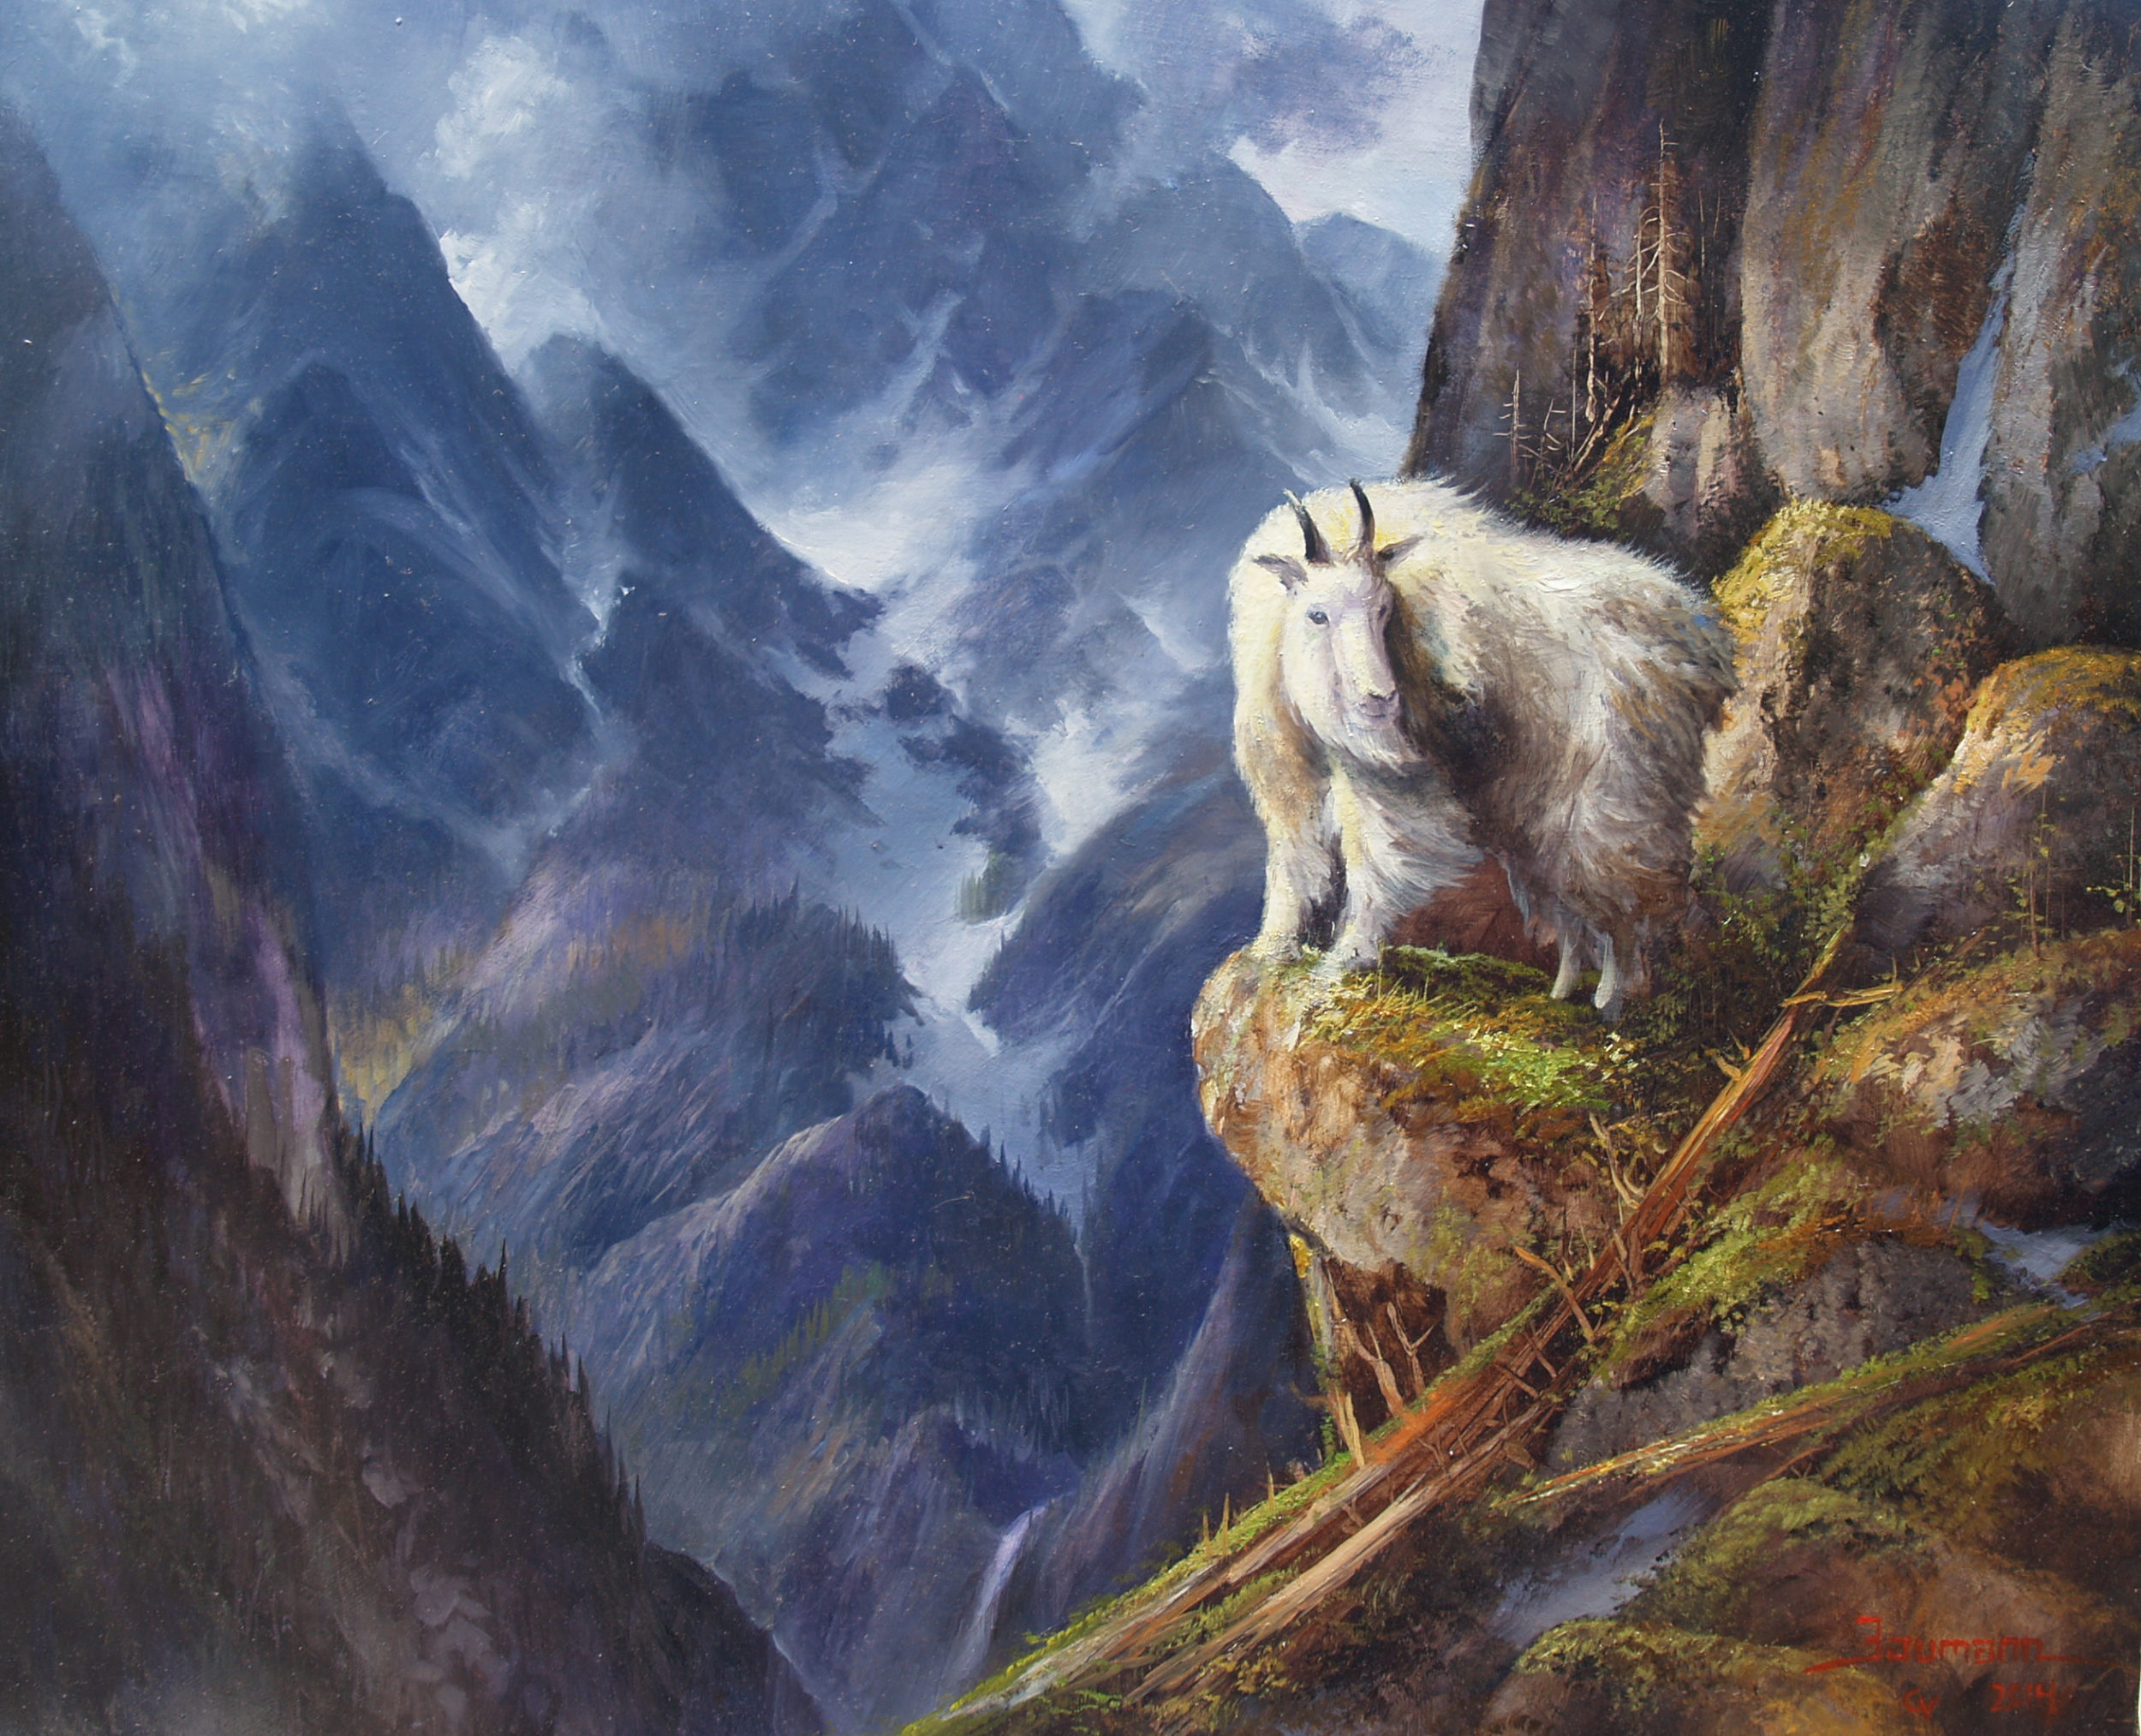 This painting titled Cliff Dweller is an oil painting by Stefan Baumann of a mountain Dall Sheep in Glacier National Park perched on the edge of a high cliff.